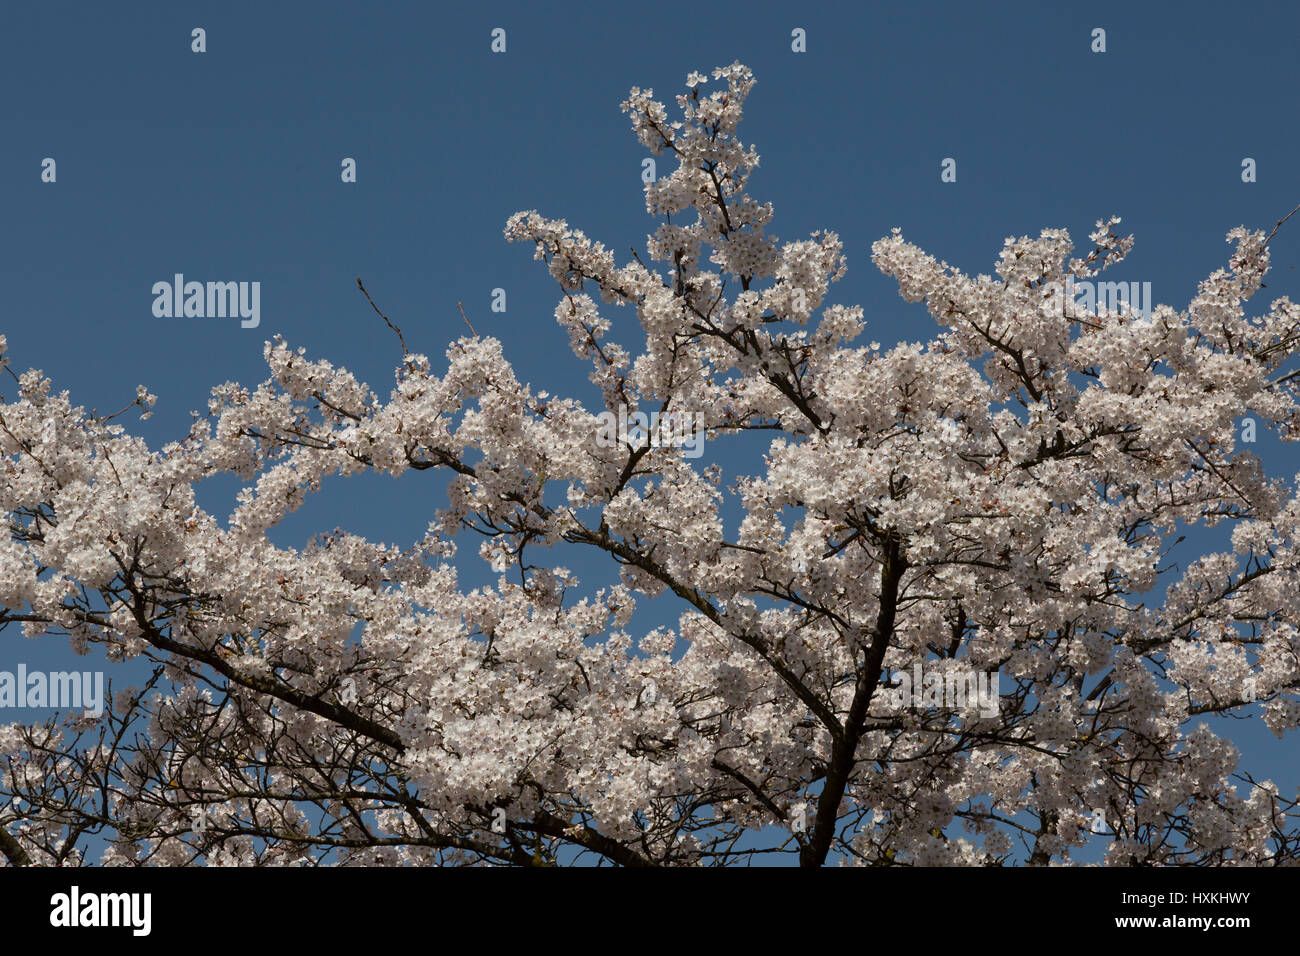 A photograph of some Japanese Cherry Blossoms in Bern, Switzerland. They are located in the public rose garden (Rosengarten) overlooking the city. Stock Photo